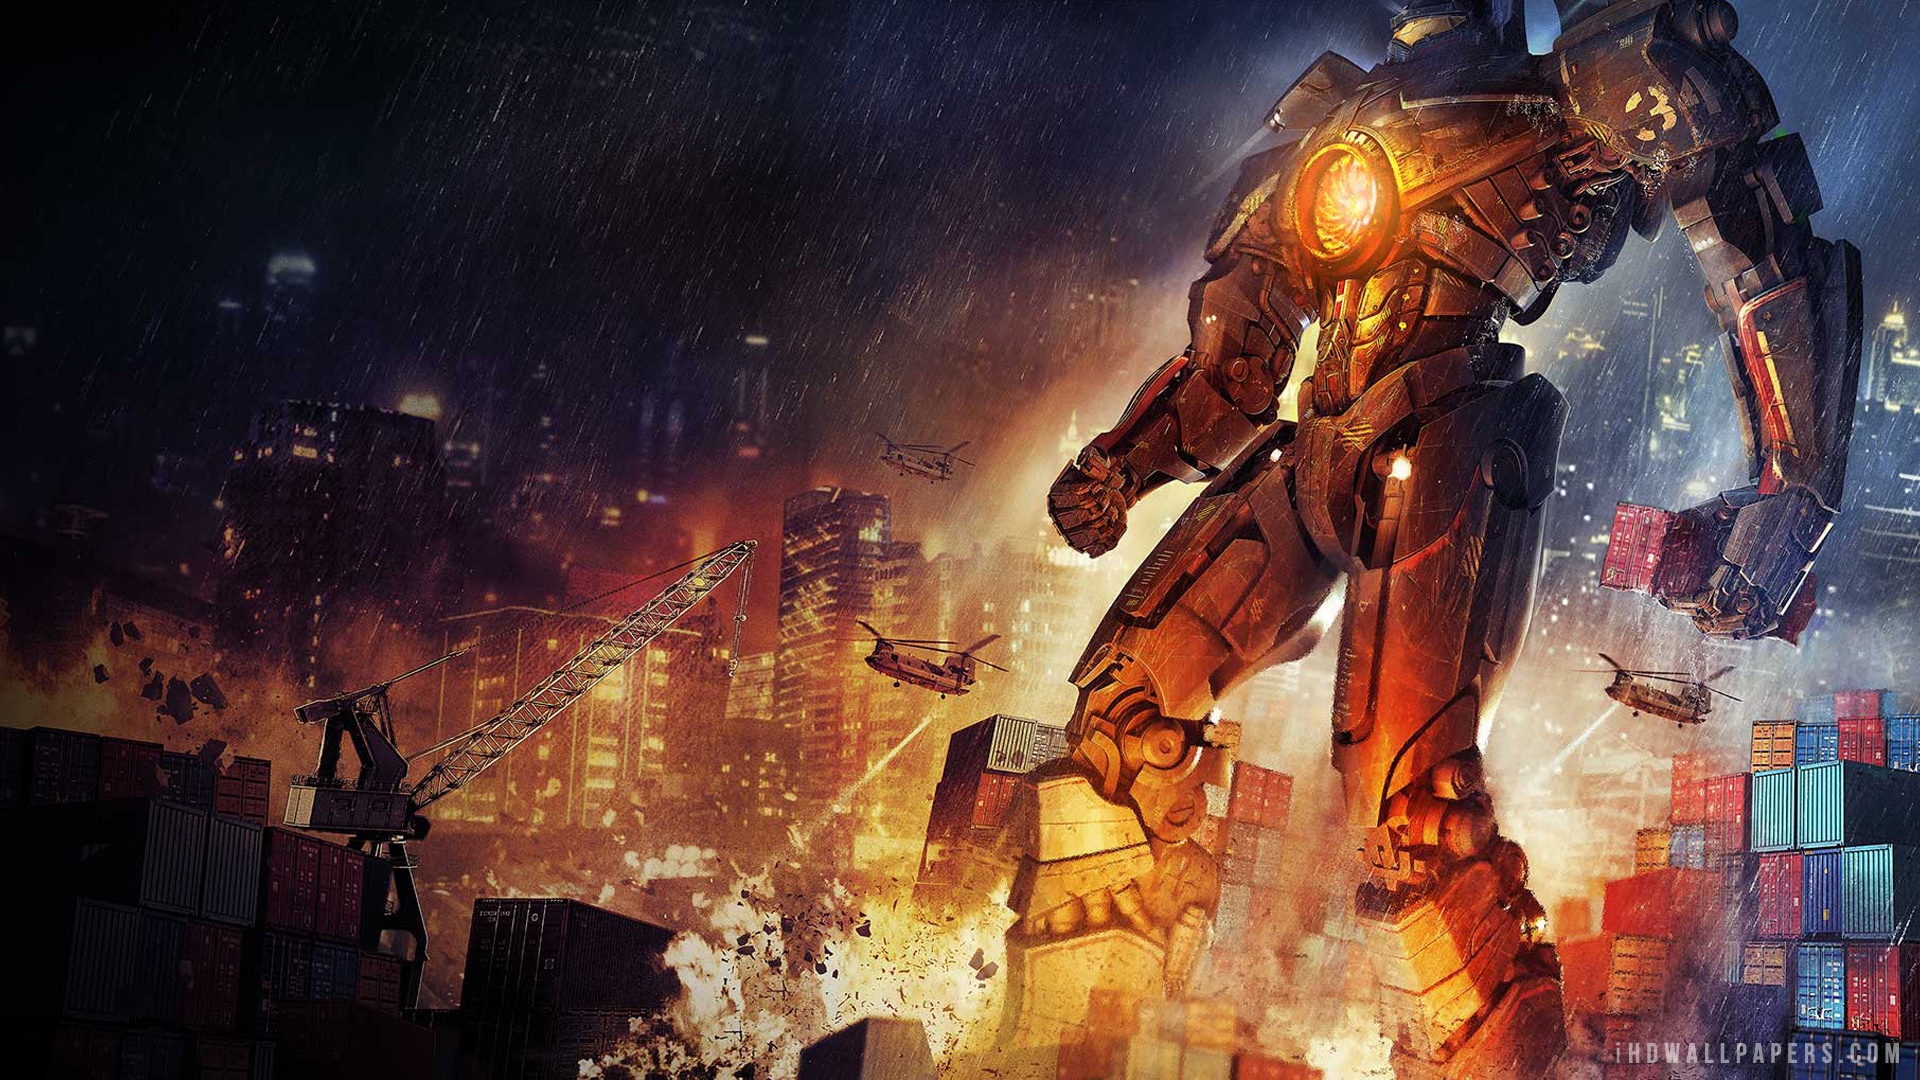 Pacific Rim Gypsy Danger Wallpaper From The Following Display